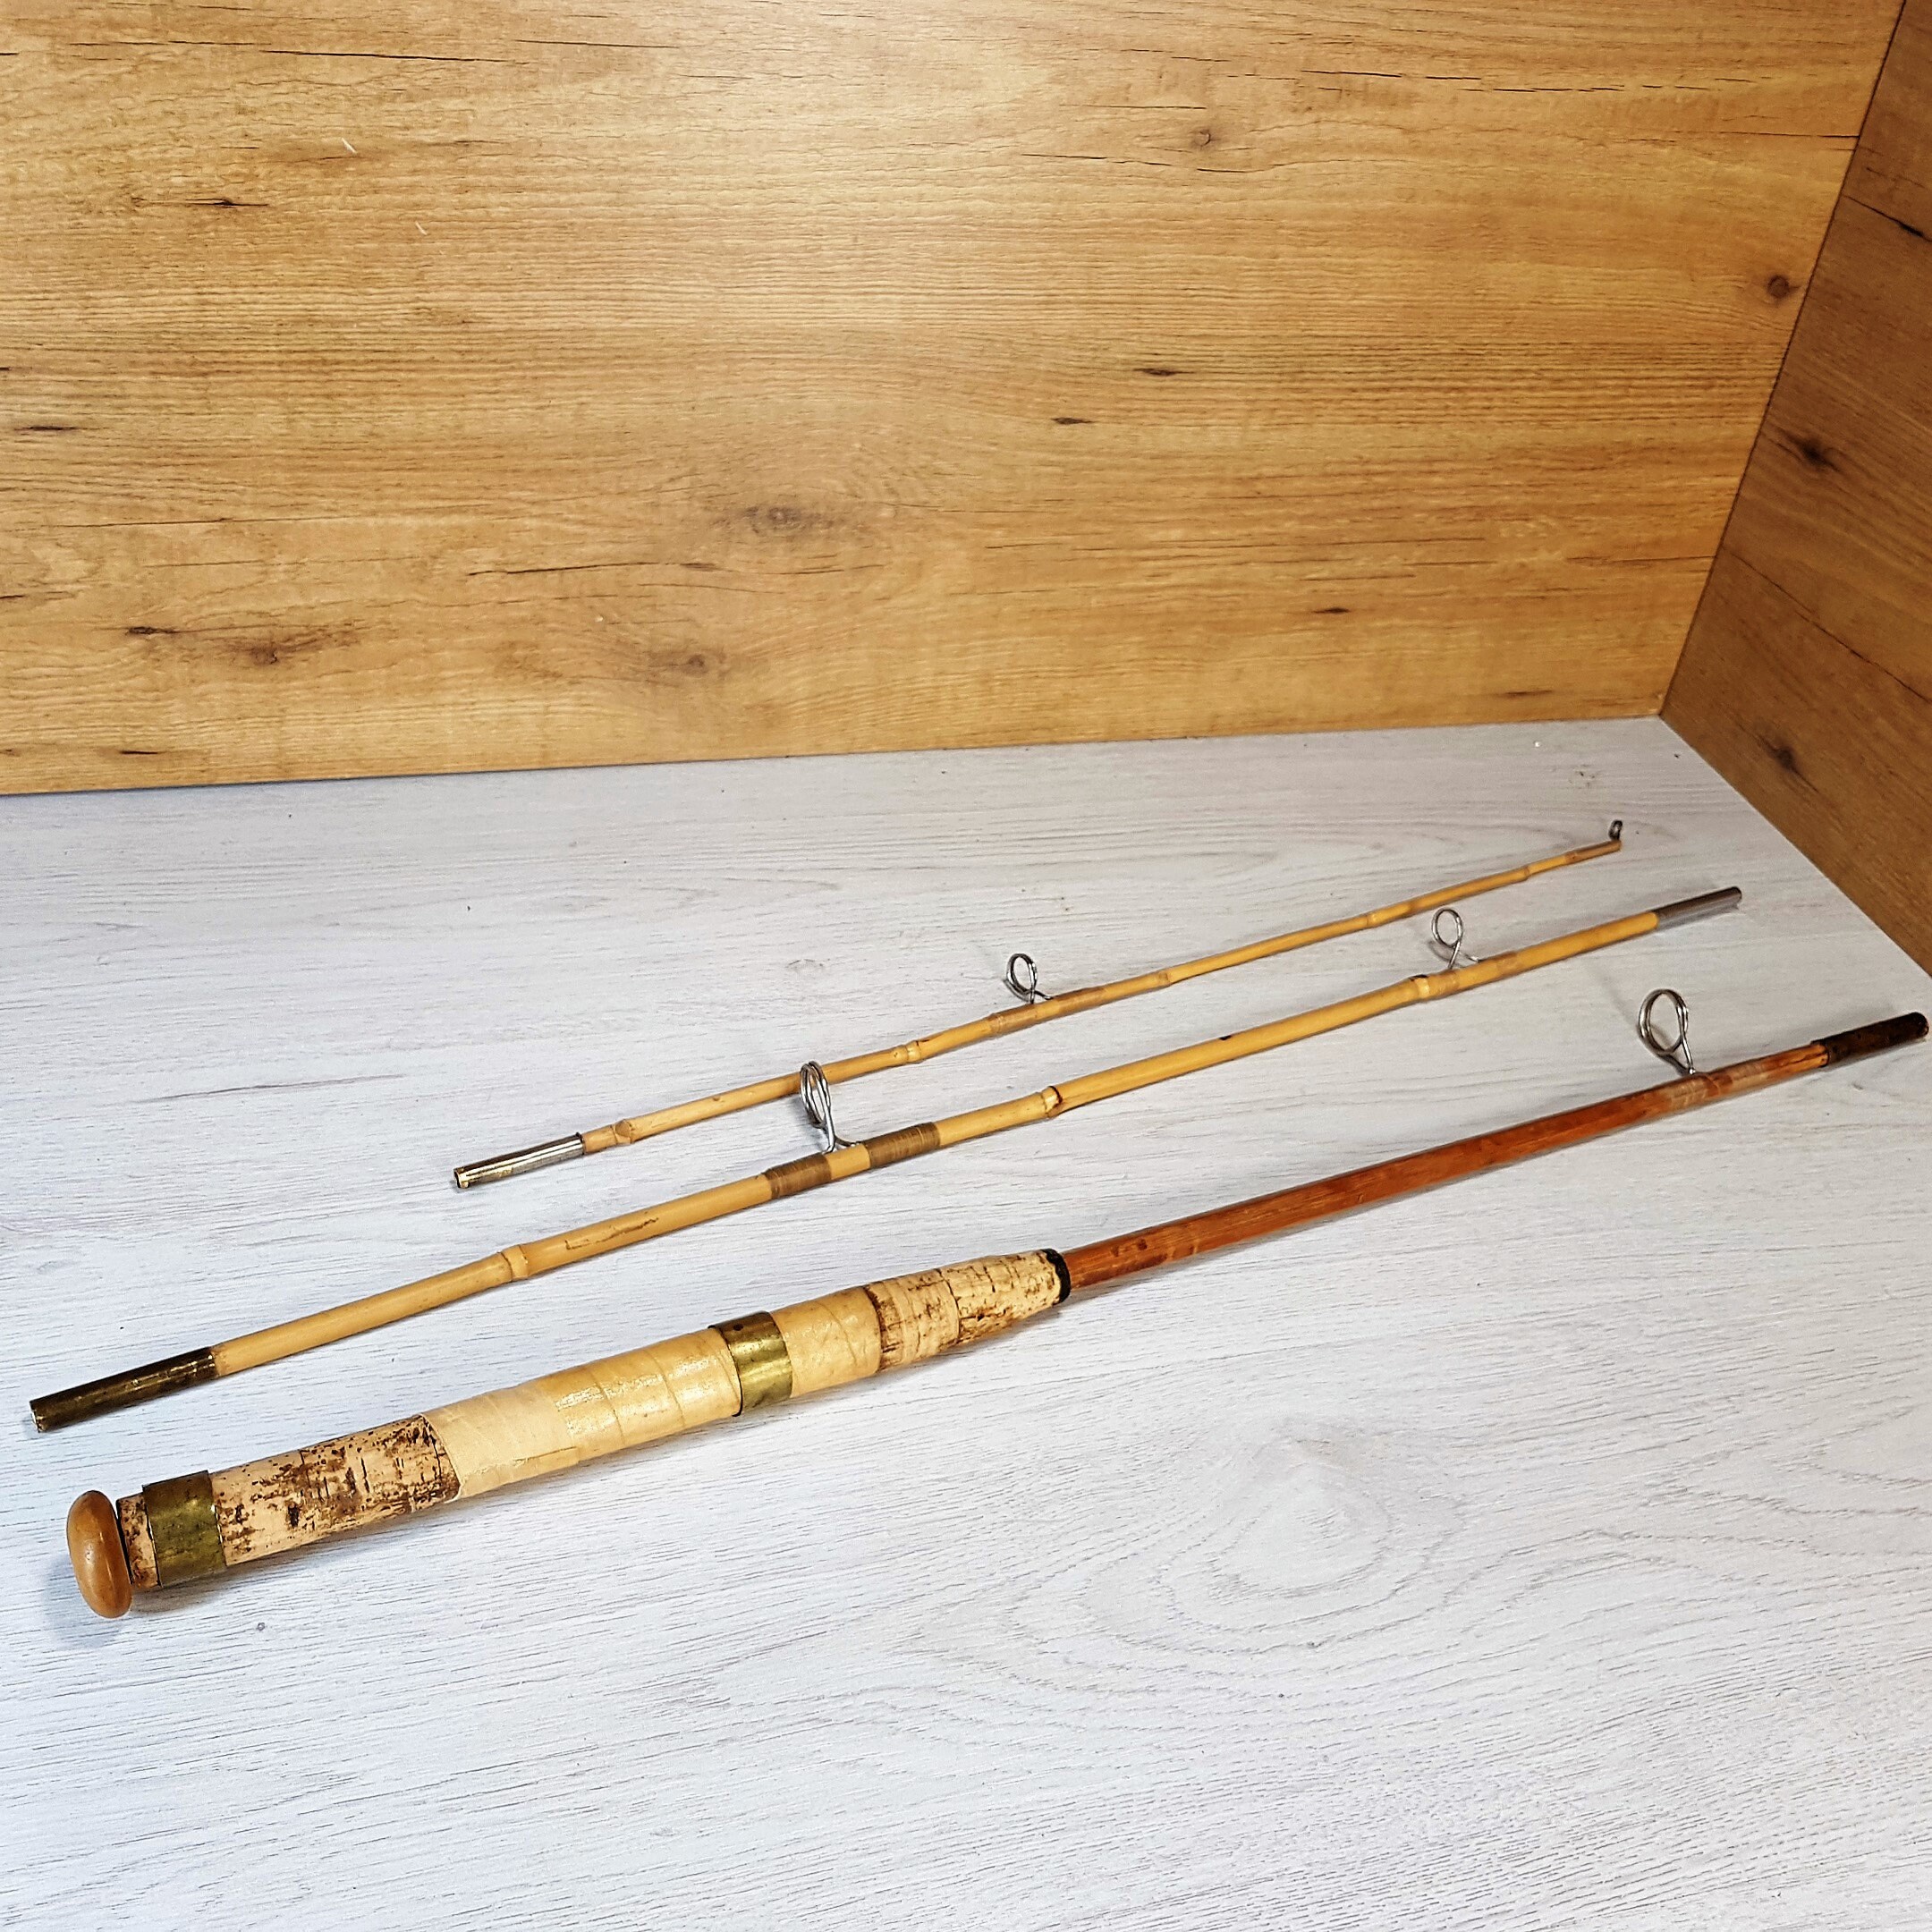 Bamboo Fishing Rod, Vintage Fishing Rod, Special Gift, Collection